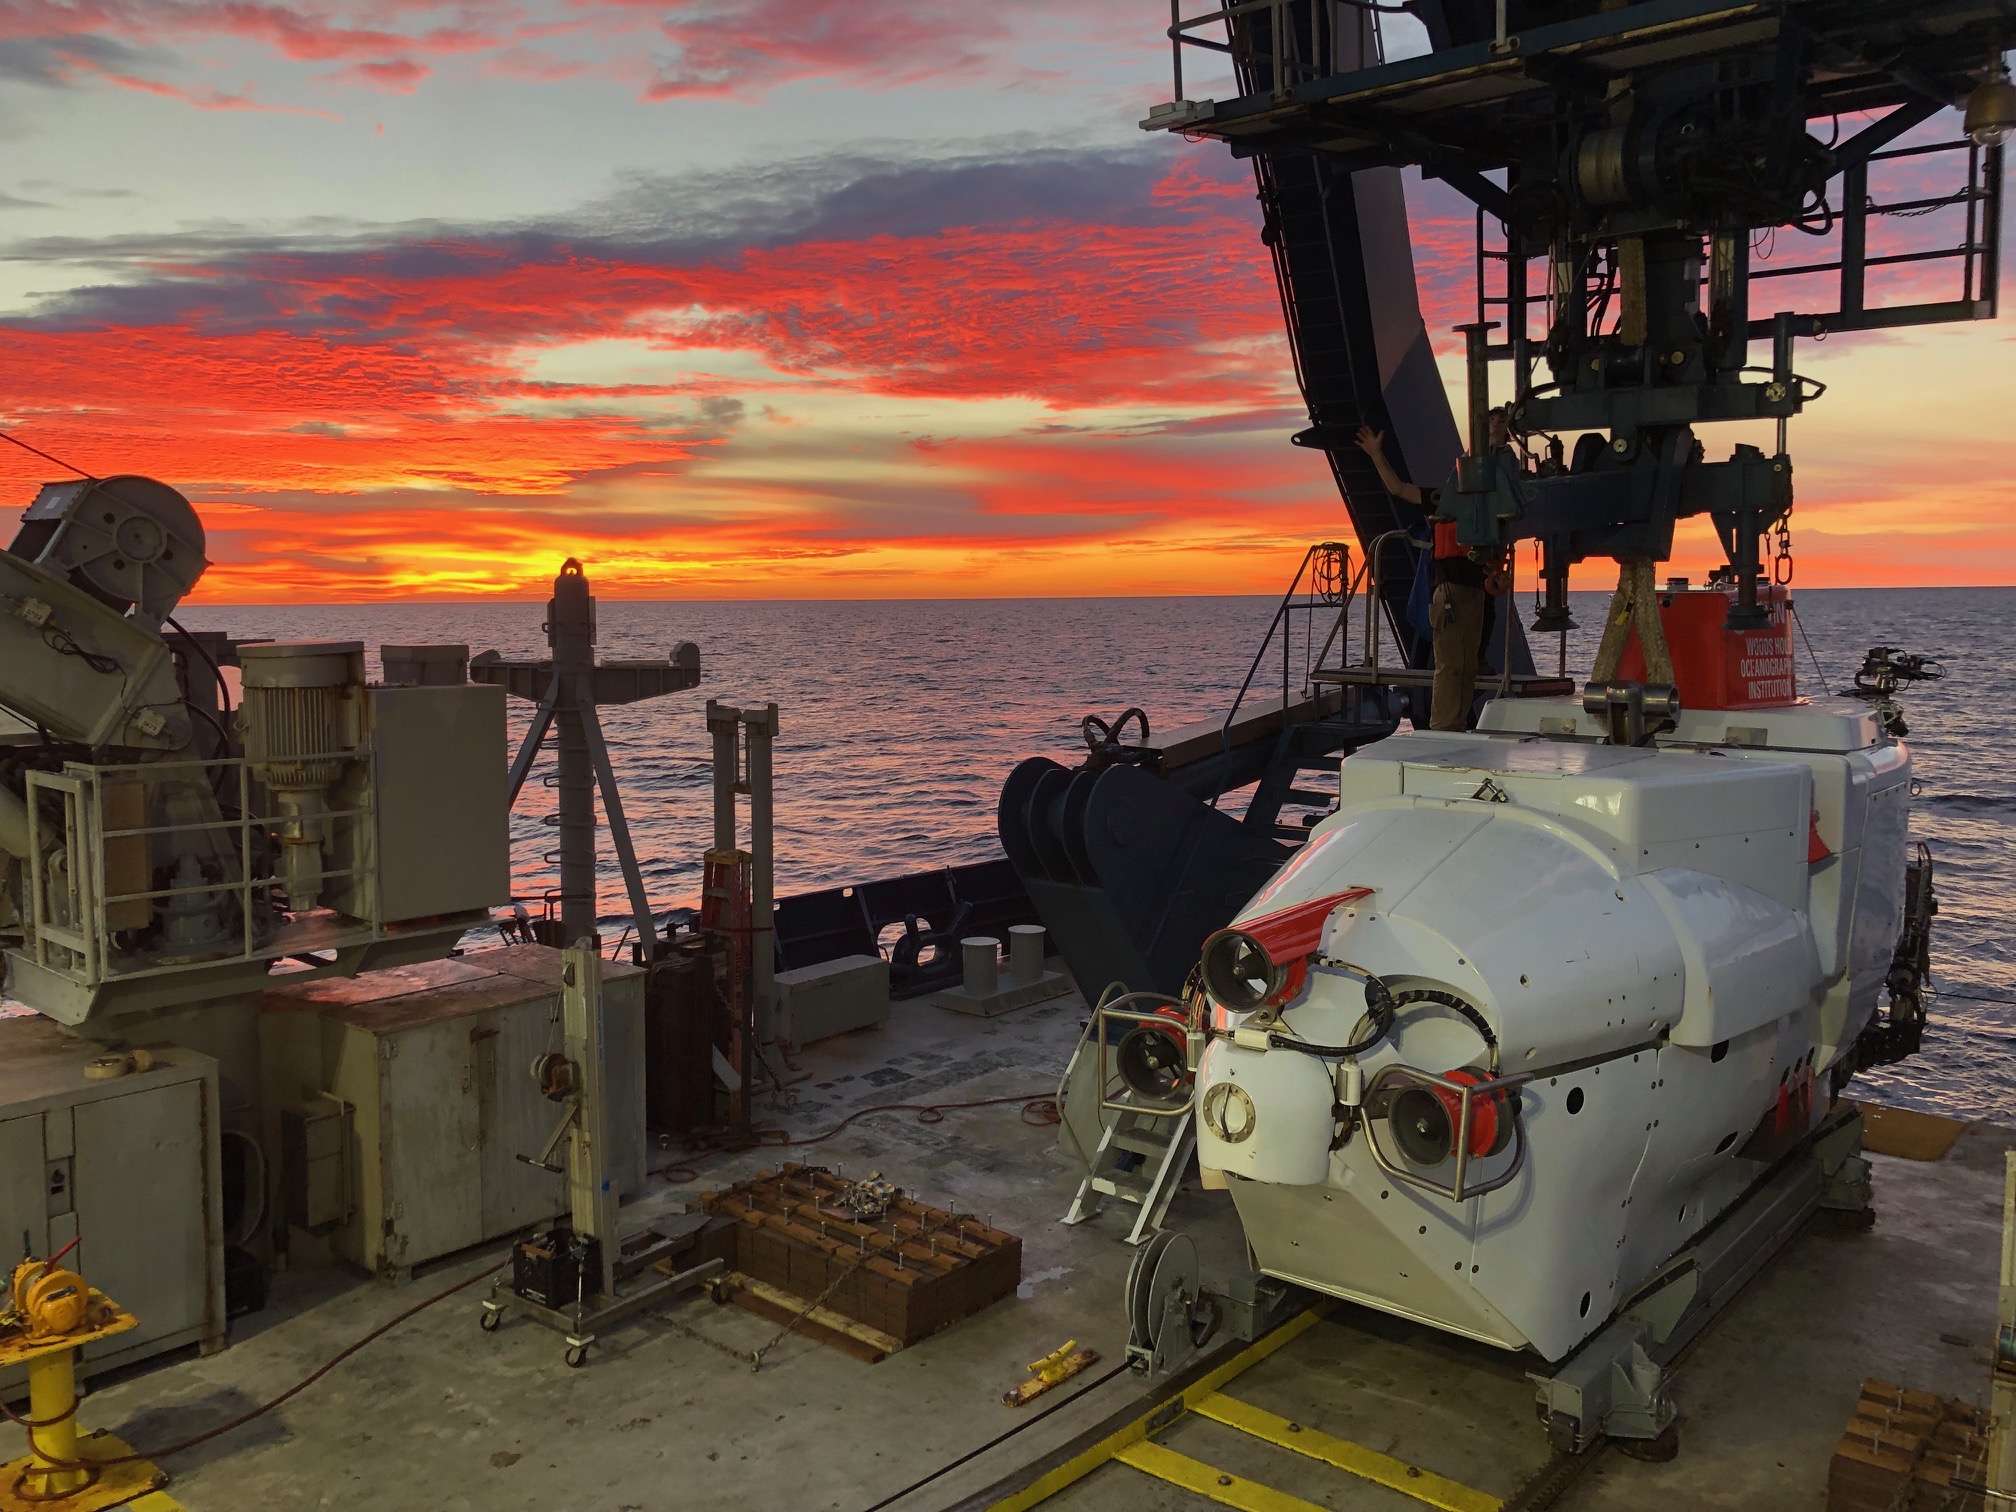 A white submersible sits on the deck of a research ship as red and orange clouds over the sea and on the horizon foretell the rising sun